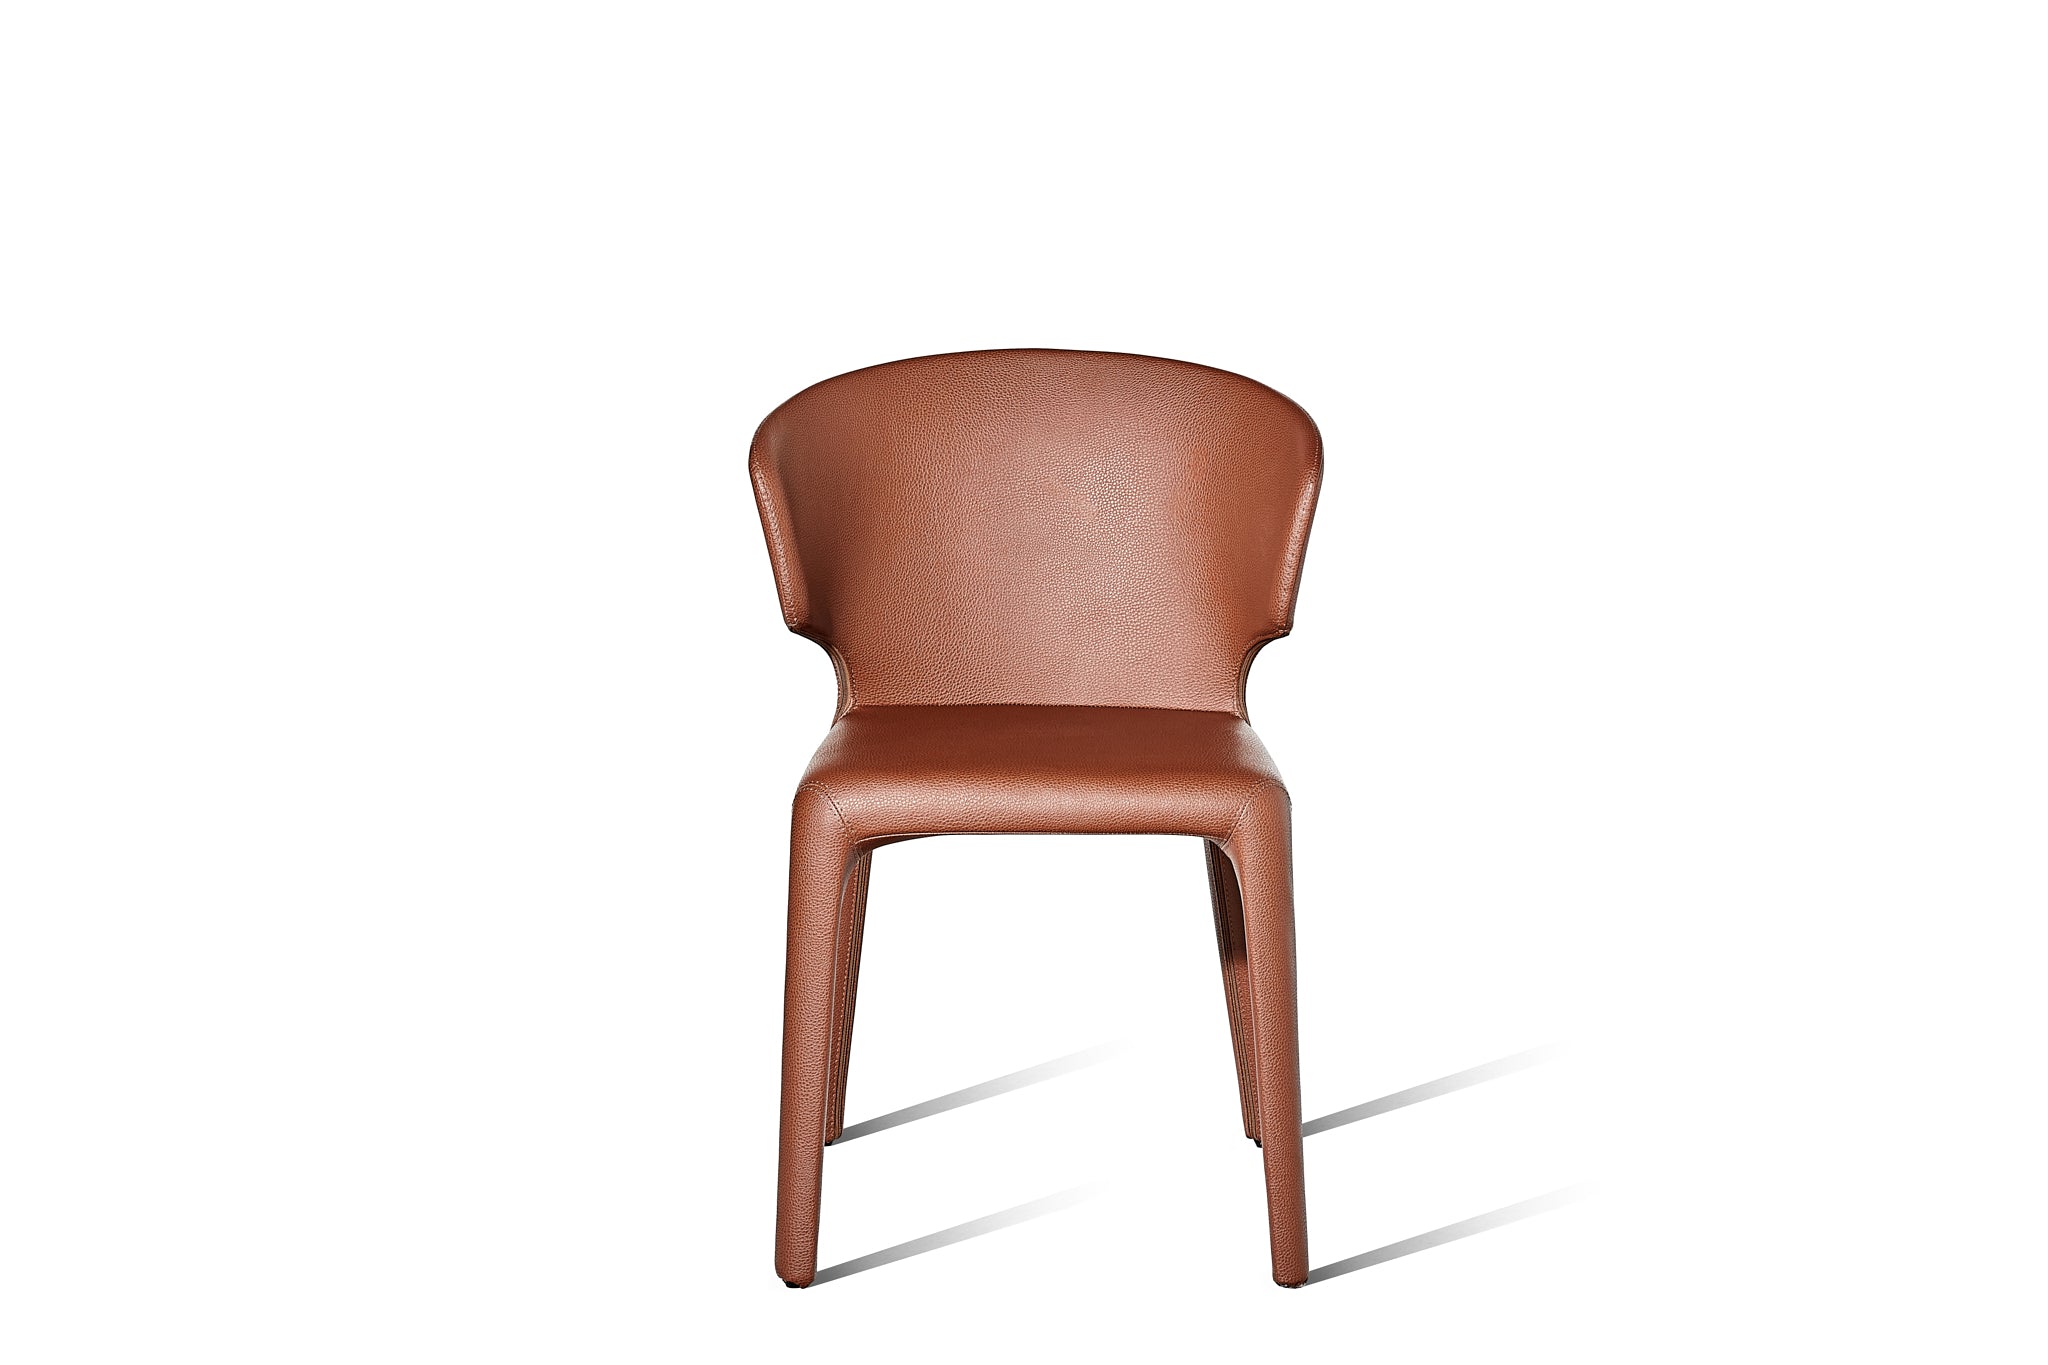 Husk Dining Chair, Tan Faux Leather - 60% OFF - Zuster Furniture